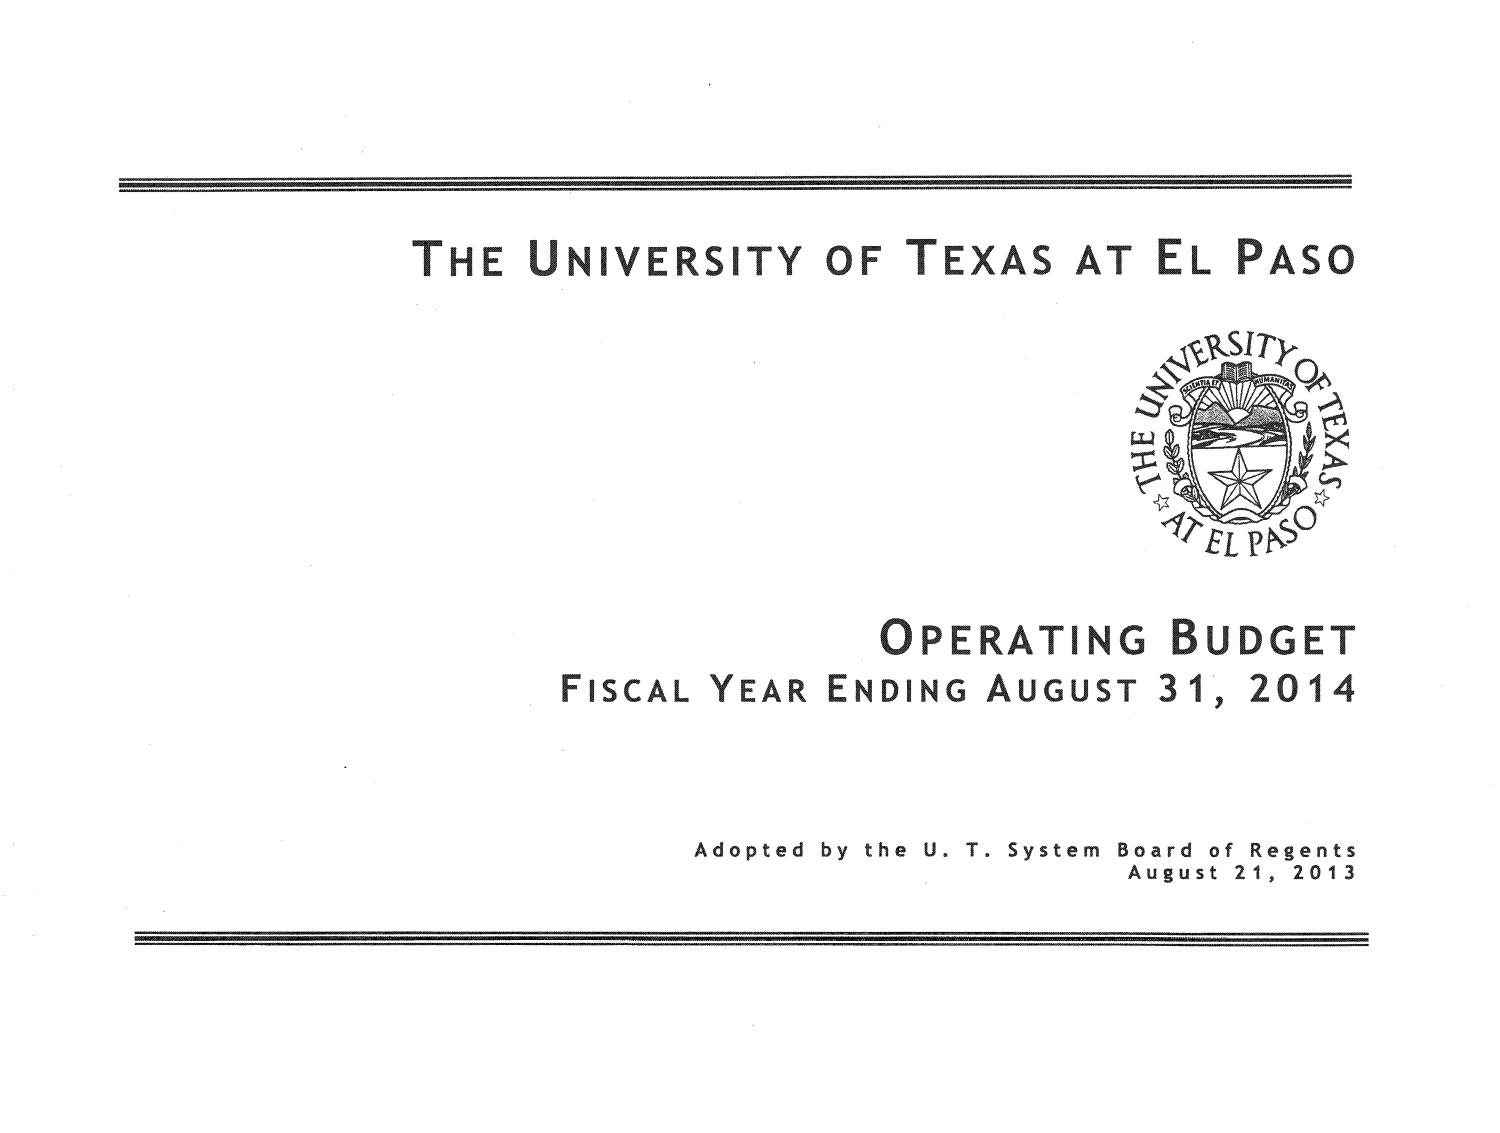 University of Texas at El Paso Operating Budget: 2014
                                                
                                                    Title Page
                                                